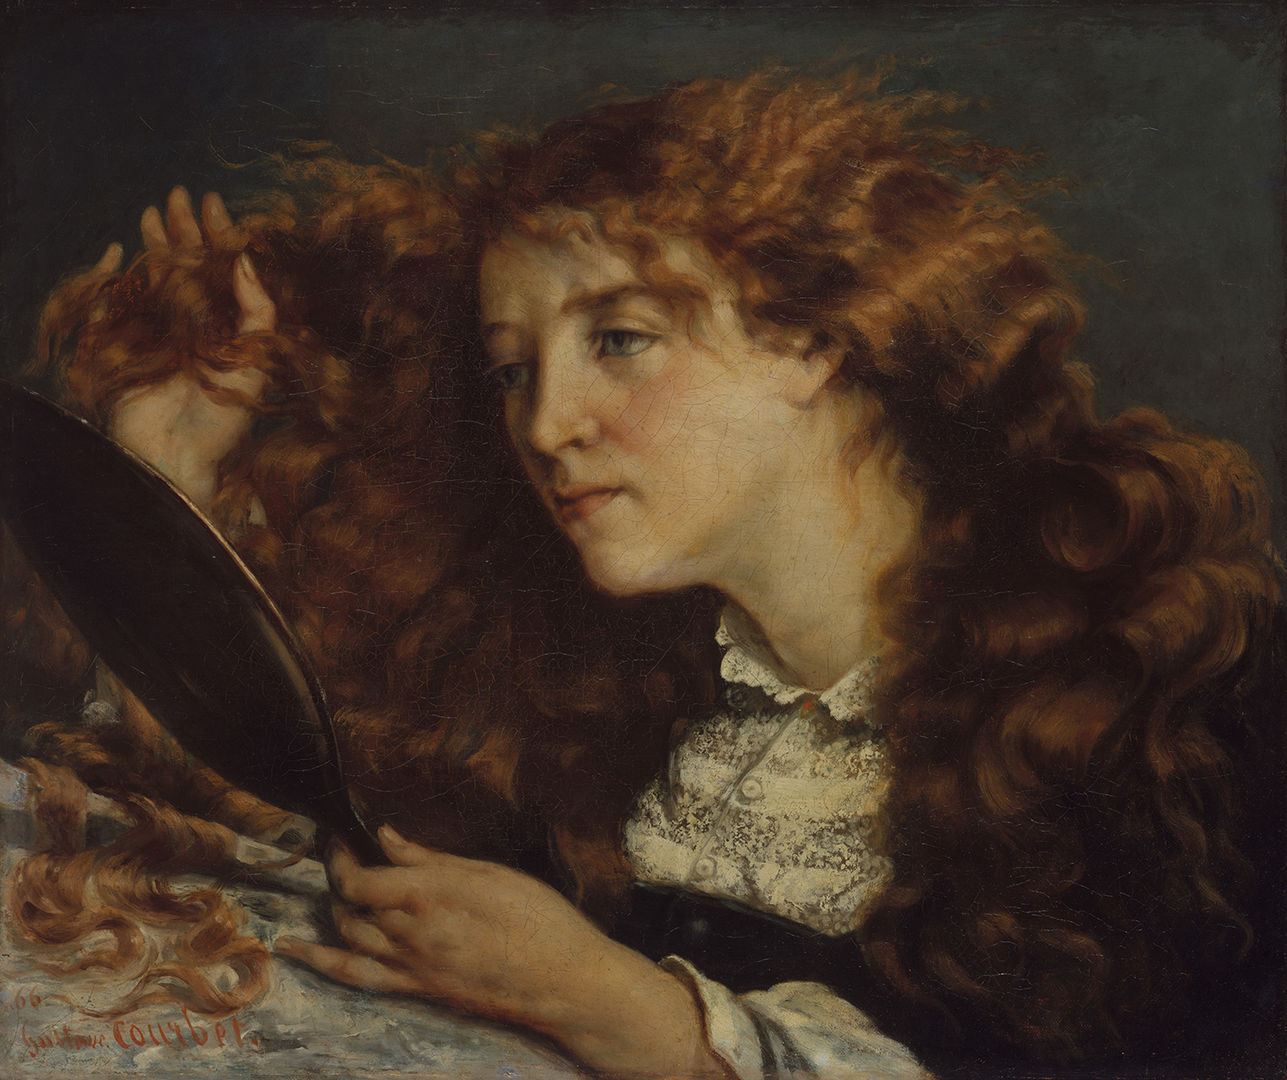 A detail of  Gustave Courbet's  "Jo, La Belle Irlandaise". A young, red haired woman facing left, combs her fingers though her long hair while staring into a hand mirror. 